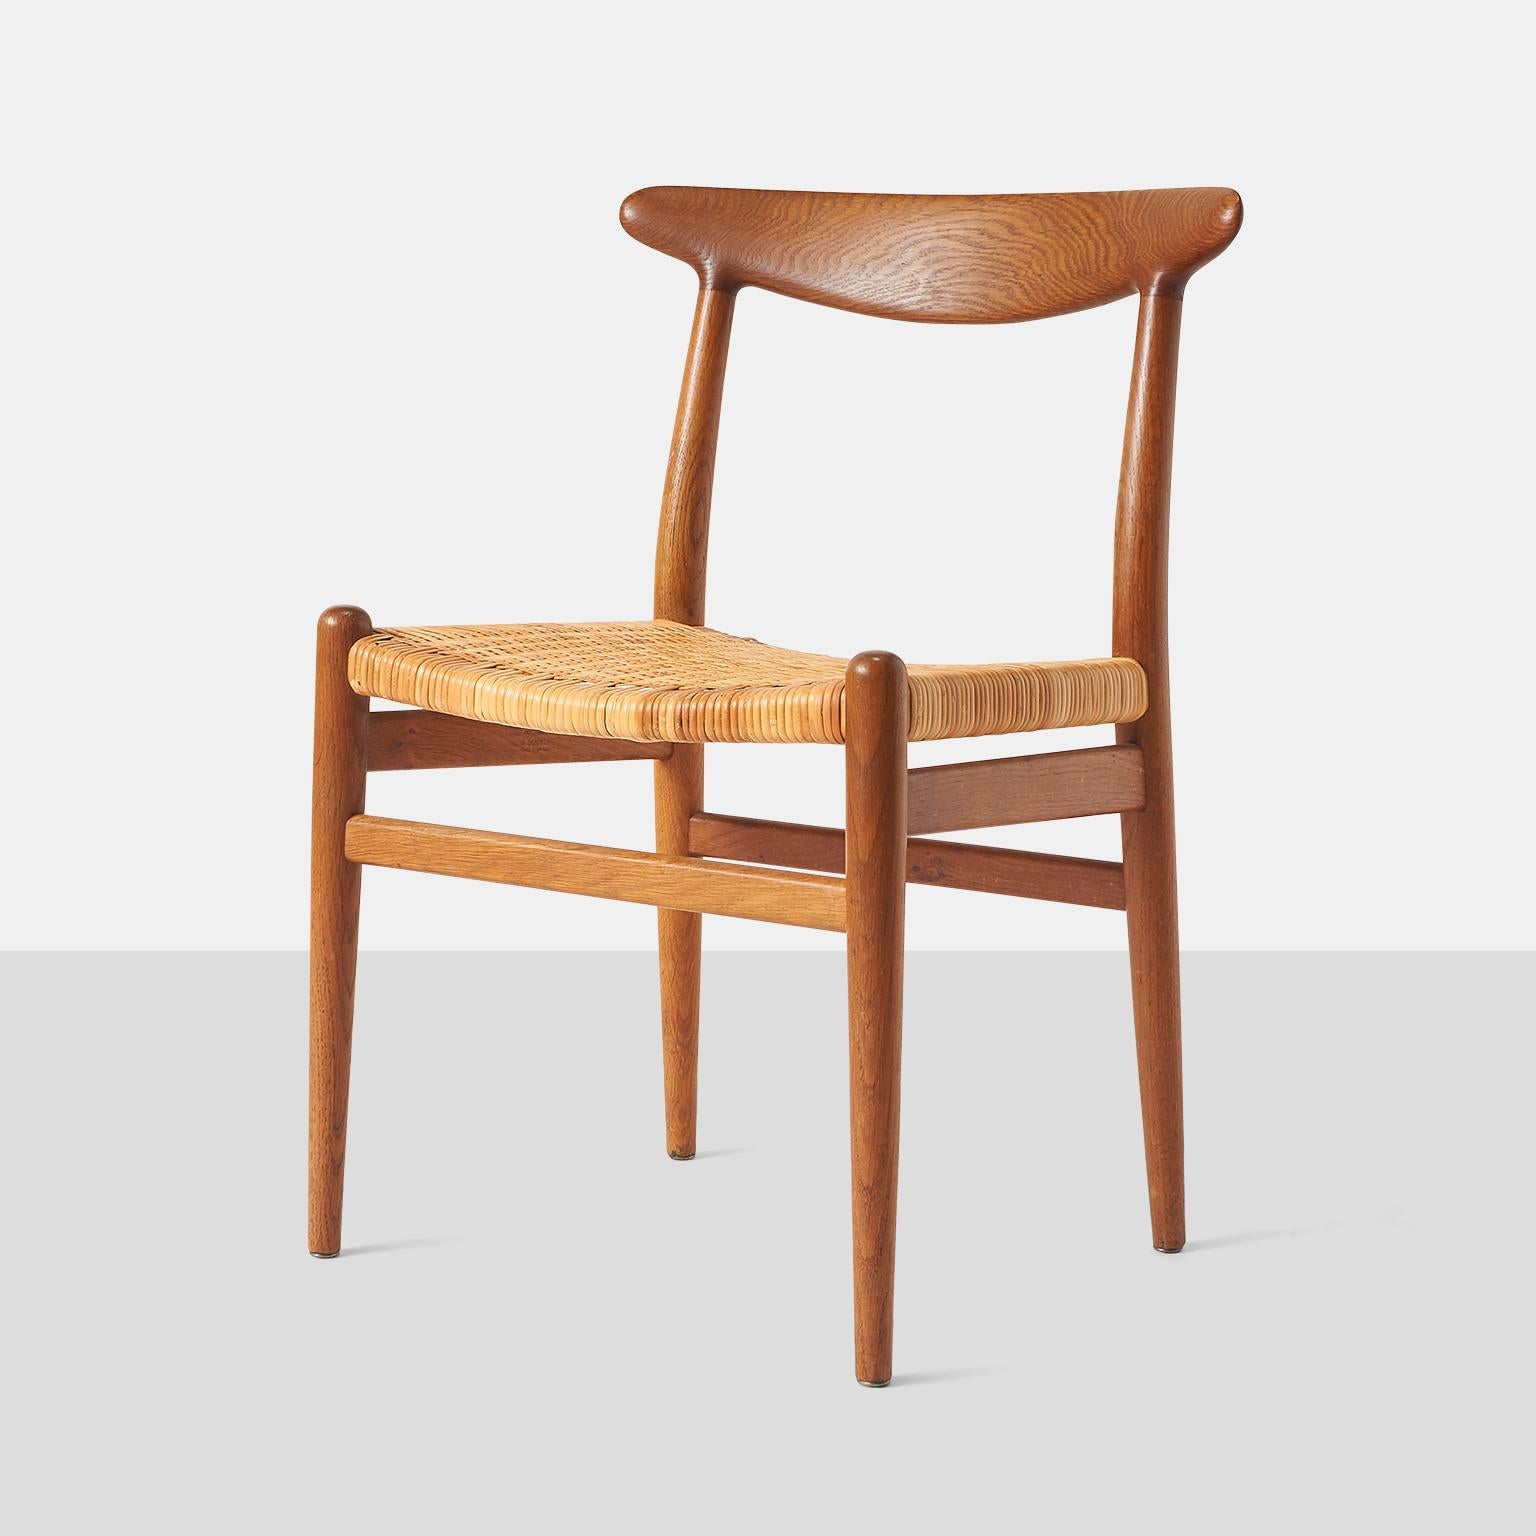 A set of 6 stained oak and cane dining chairs. Each chair frame is branded with the manufacturer's mark; [C.M. Madsen Fabriker Haarby Danmark Made in Denmark Design: Hans J. Wegner].


Have another set of 6 available. 


